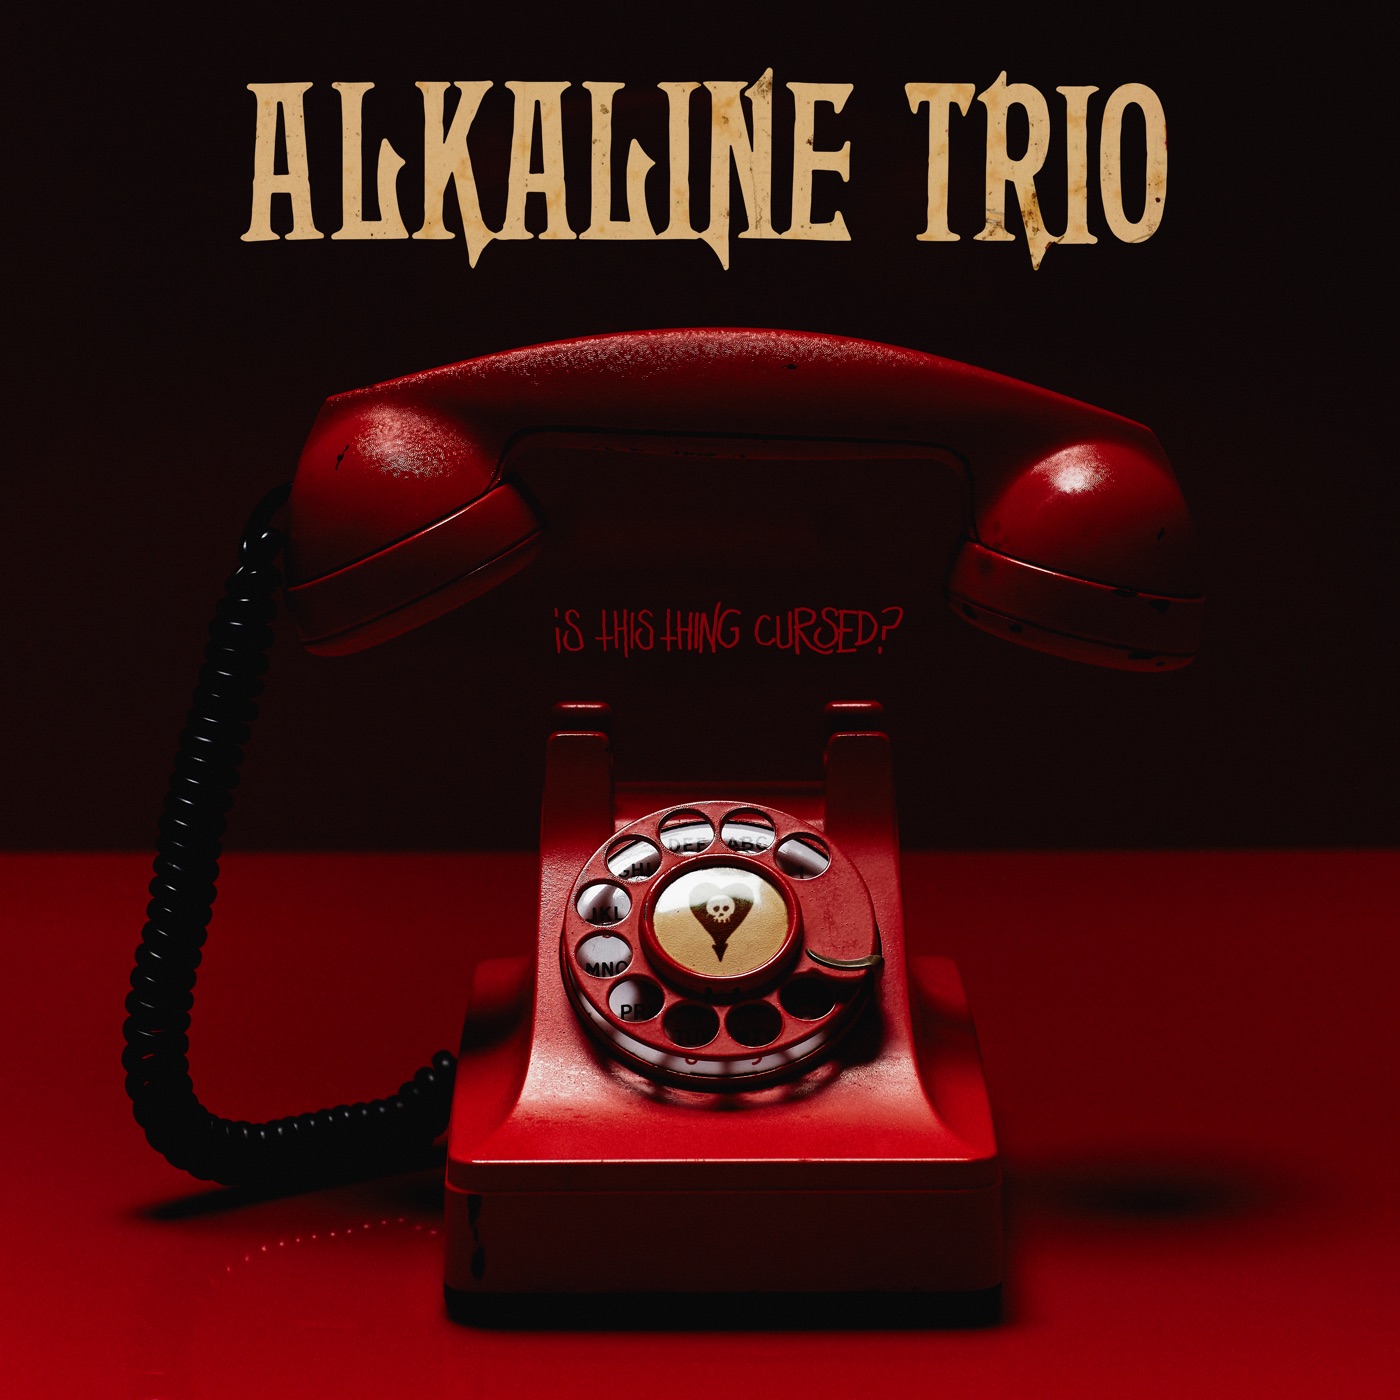 Is This Thing Cursed? by Alkaline Trio